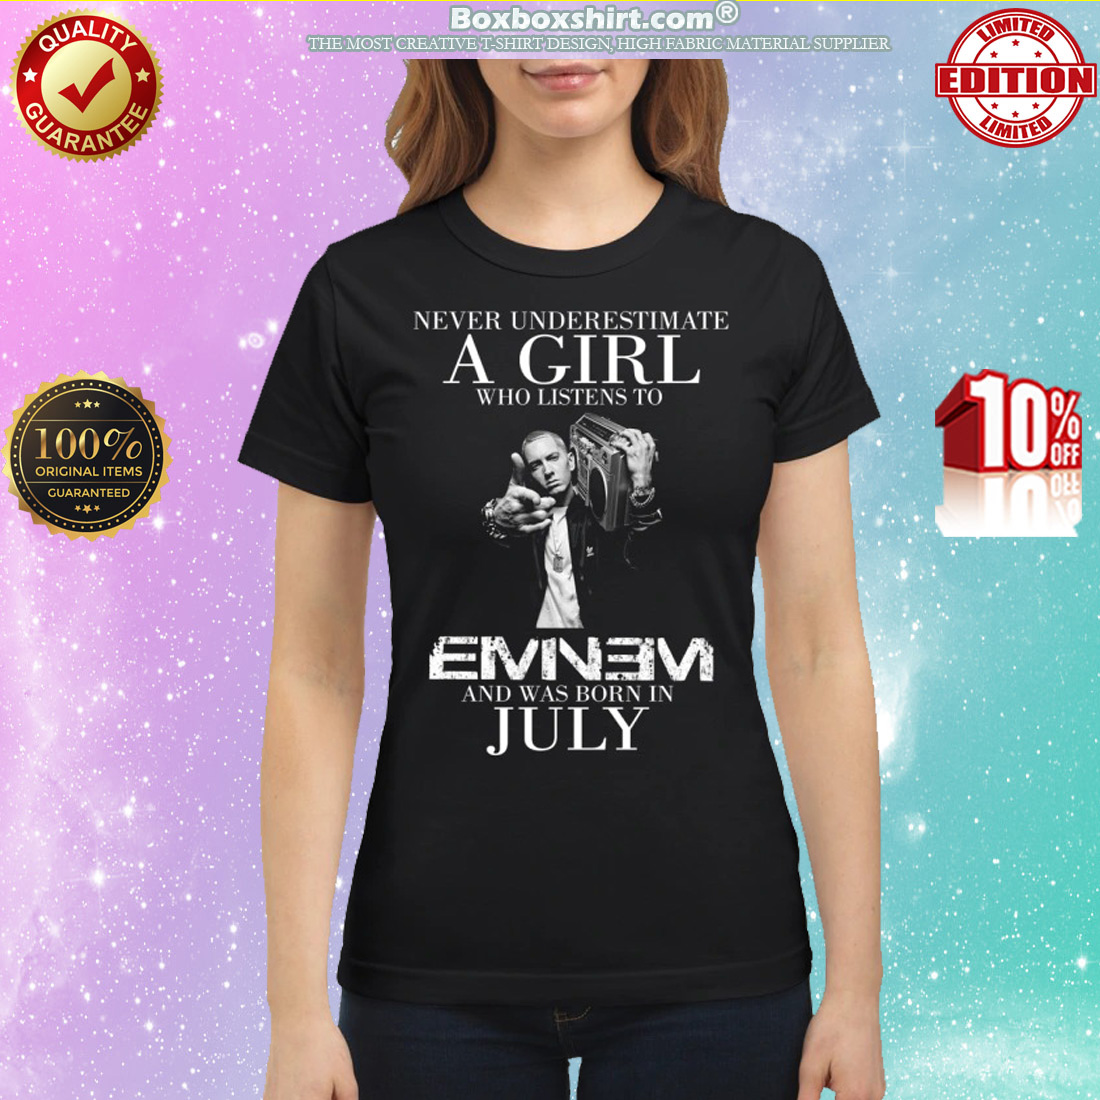 Never underestimate a girl who listens to Eminem and was born in July classic shirt